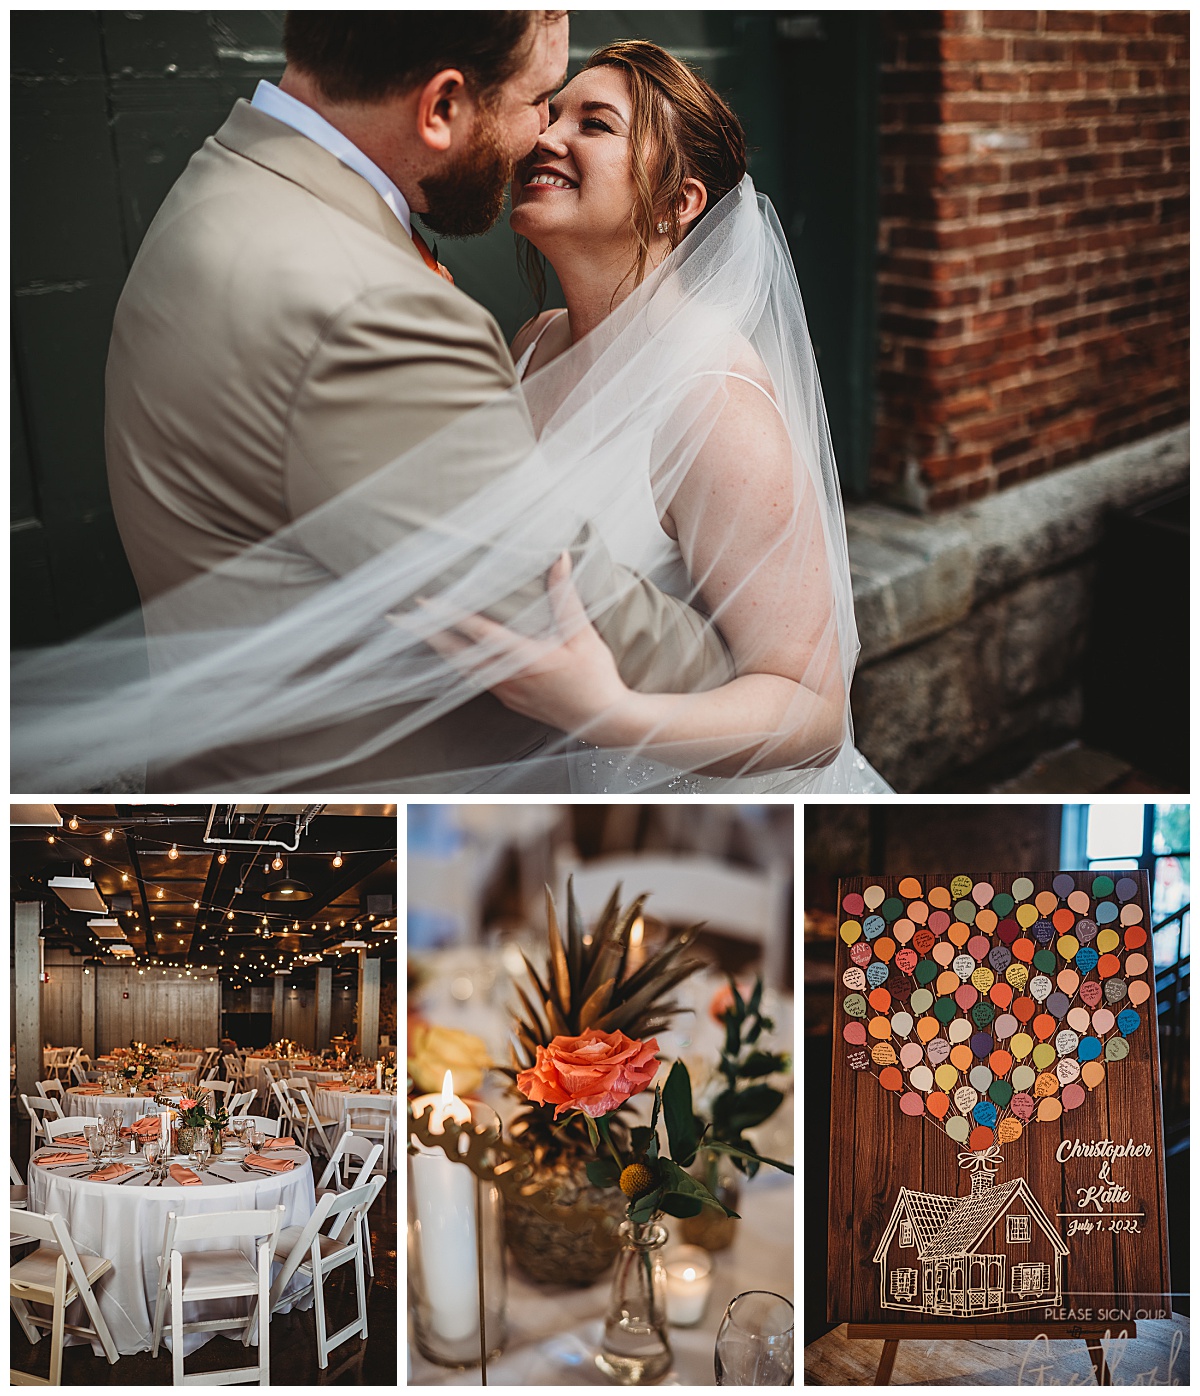 Colorful wedding reception decorations for a summer wedding at Mainstreet Ballroom captured by Brittany Dunbar Photography, an Ellicott City Wedding Photographer.